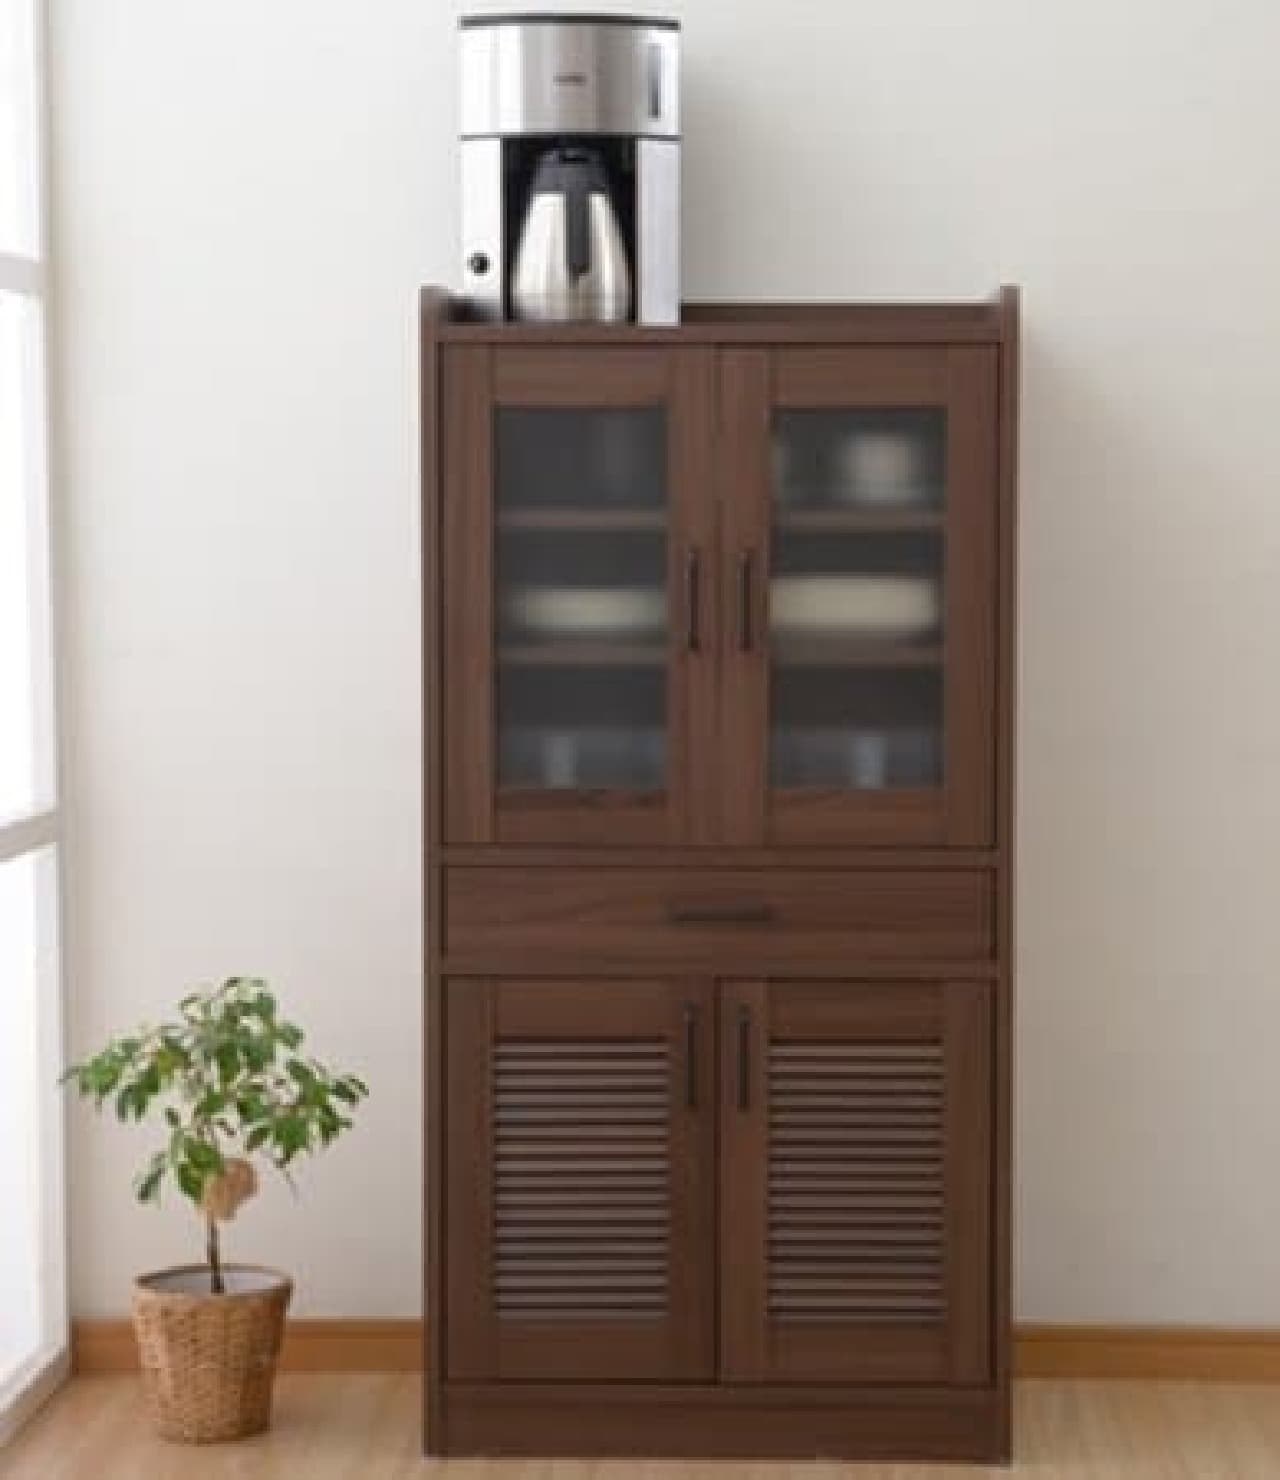 The cupboard has a design that does not interfere with the interior